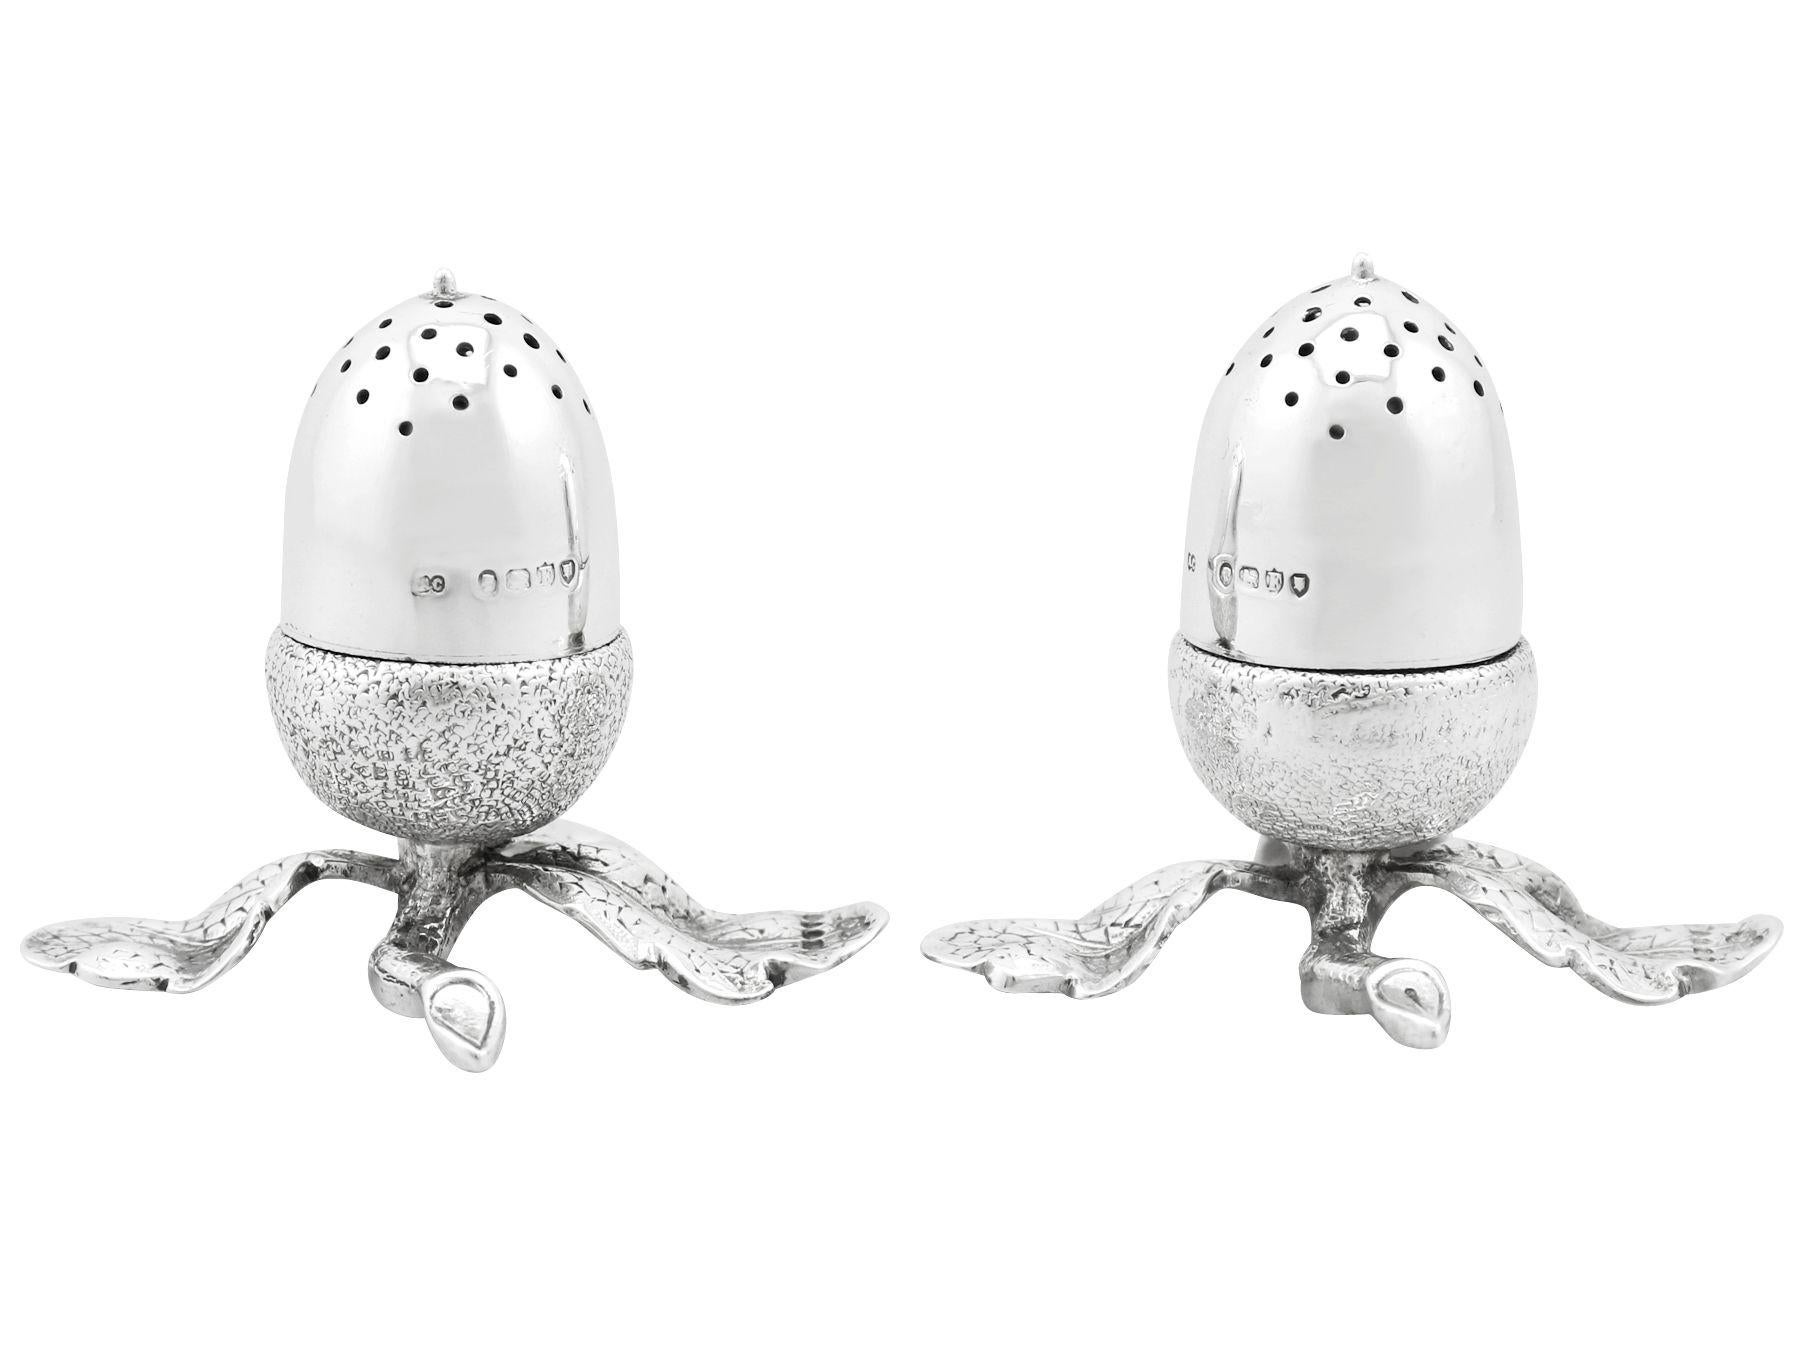 An exceptional, unusual, fine and impressive pair of antique Victorian English sterling silver acorn peppers; an addition to our silver cruets/condiments collection.

These exceptional antique Victorian English cast sterling silver peppers are